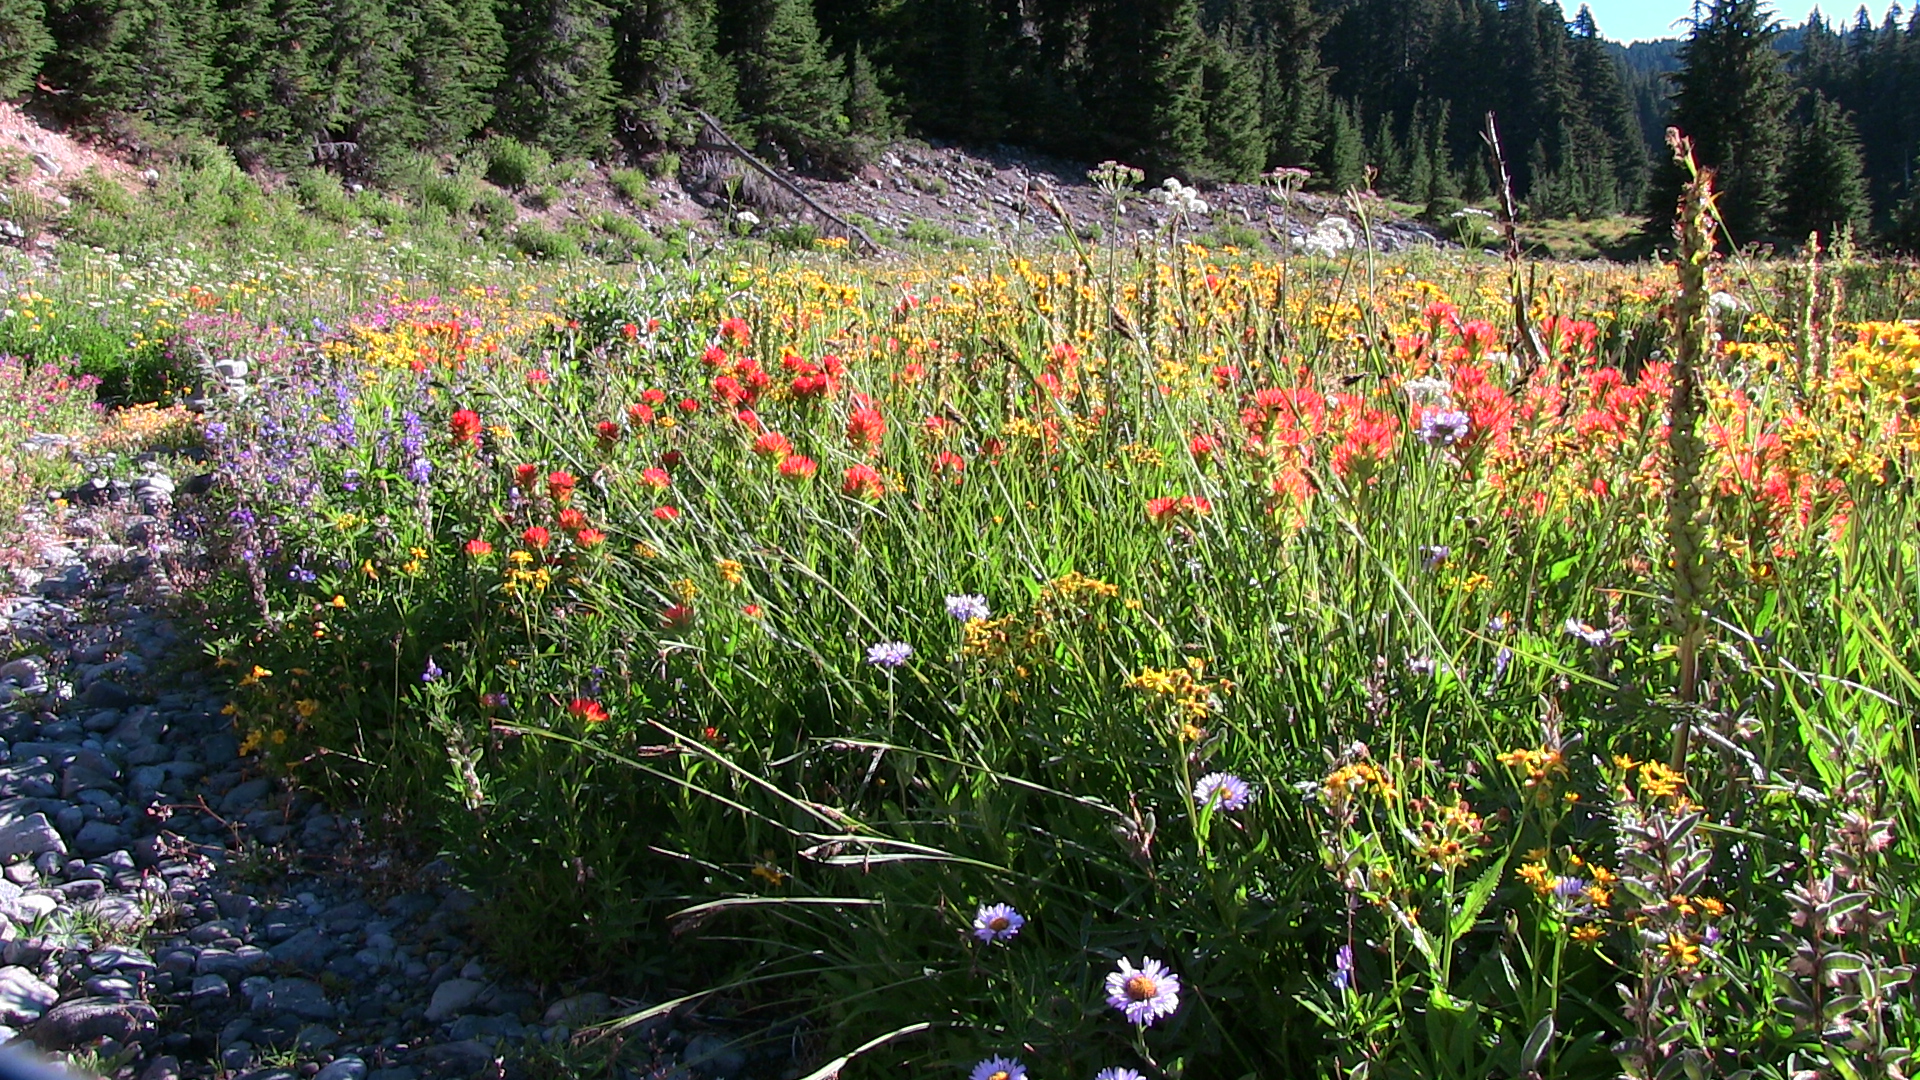 Meadow wildflowers in Jefferson Park, Oregon at the 6000 foot elevation.